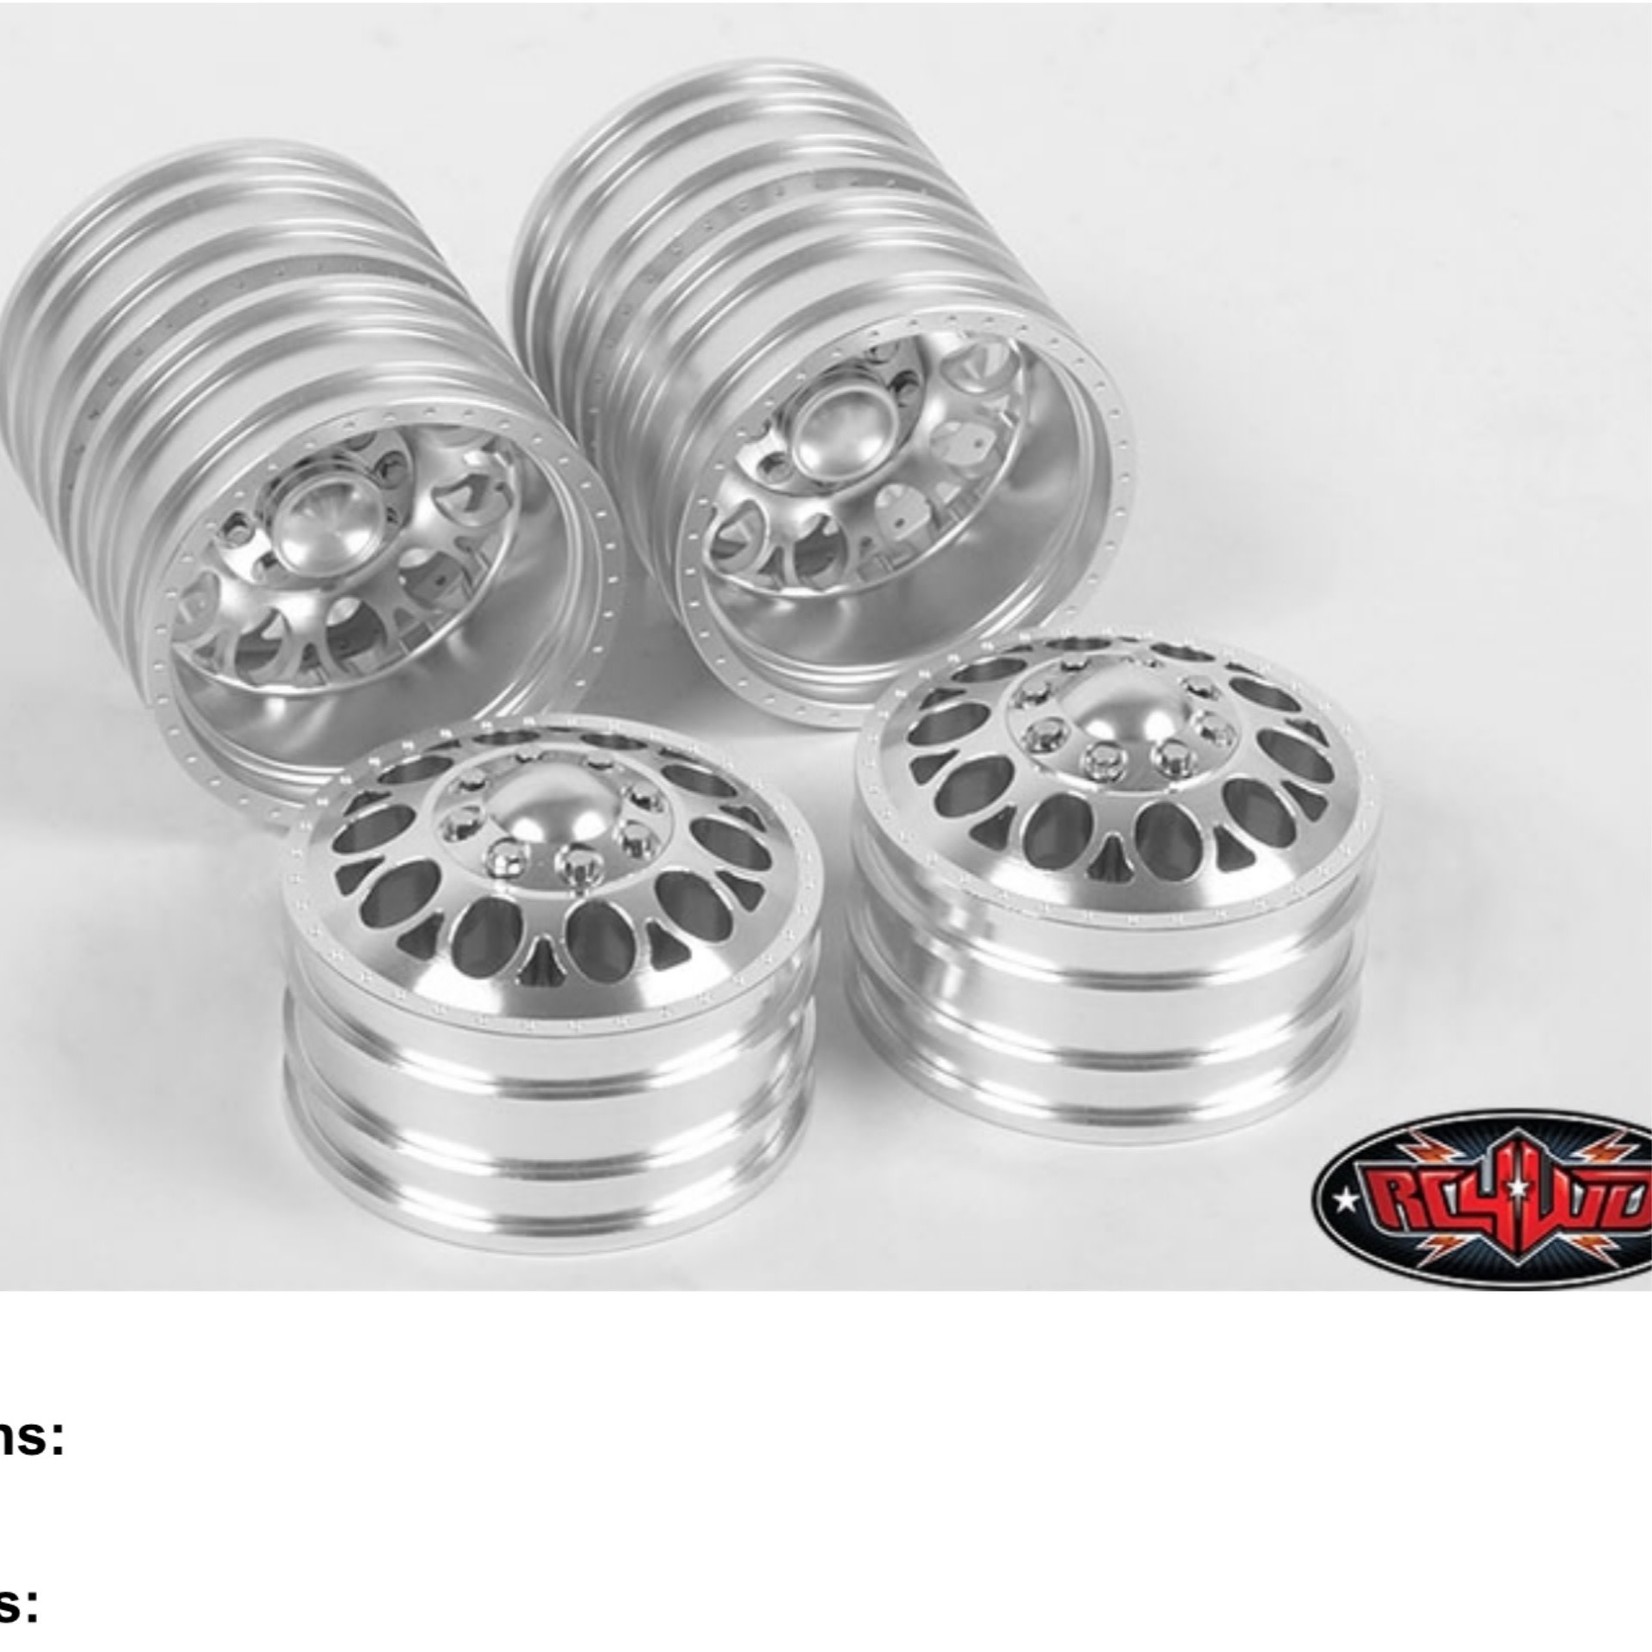 RC4WD RC4WD DOUBLE TROUBLE "3" ALUMINUM DUALLY 1.9" WHEELS  #Z-W0194